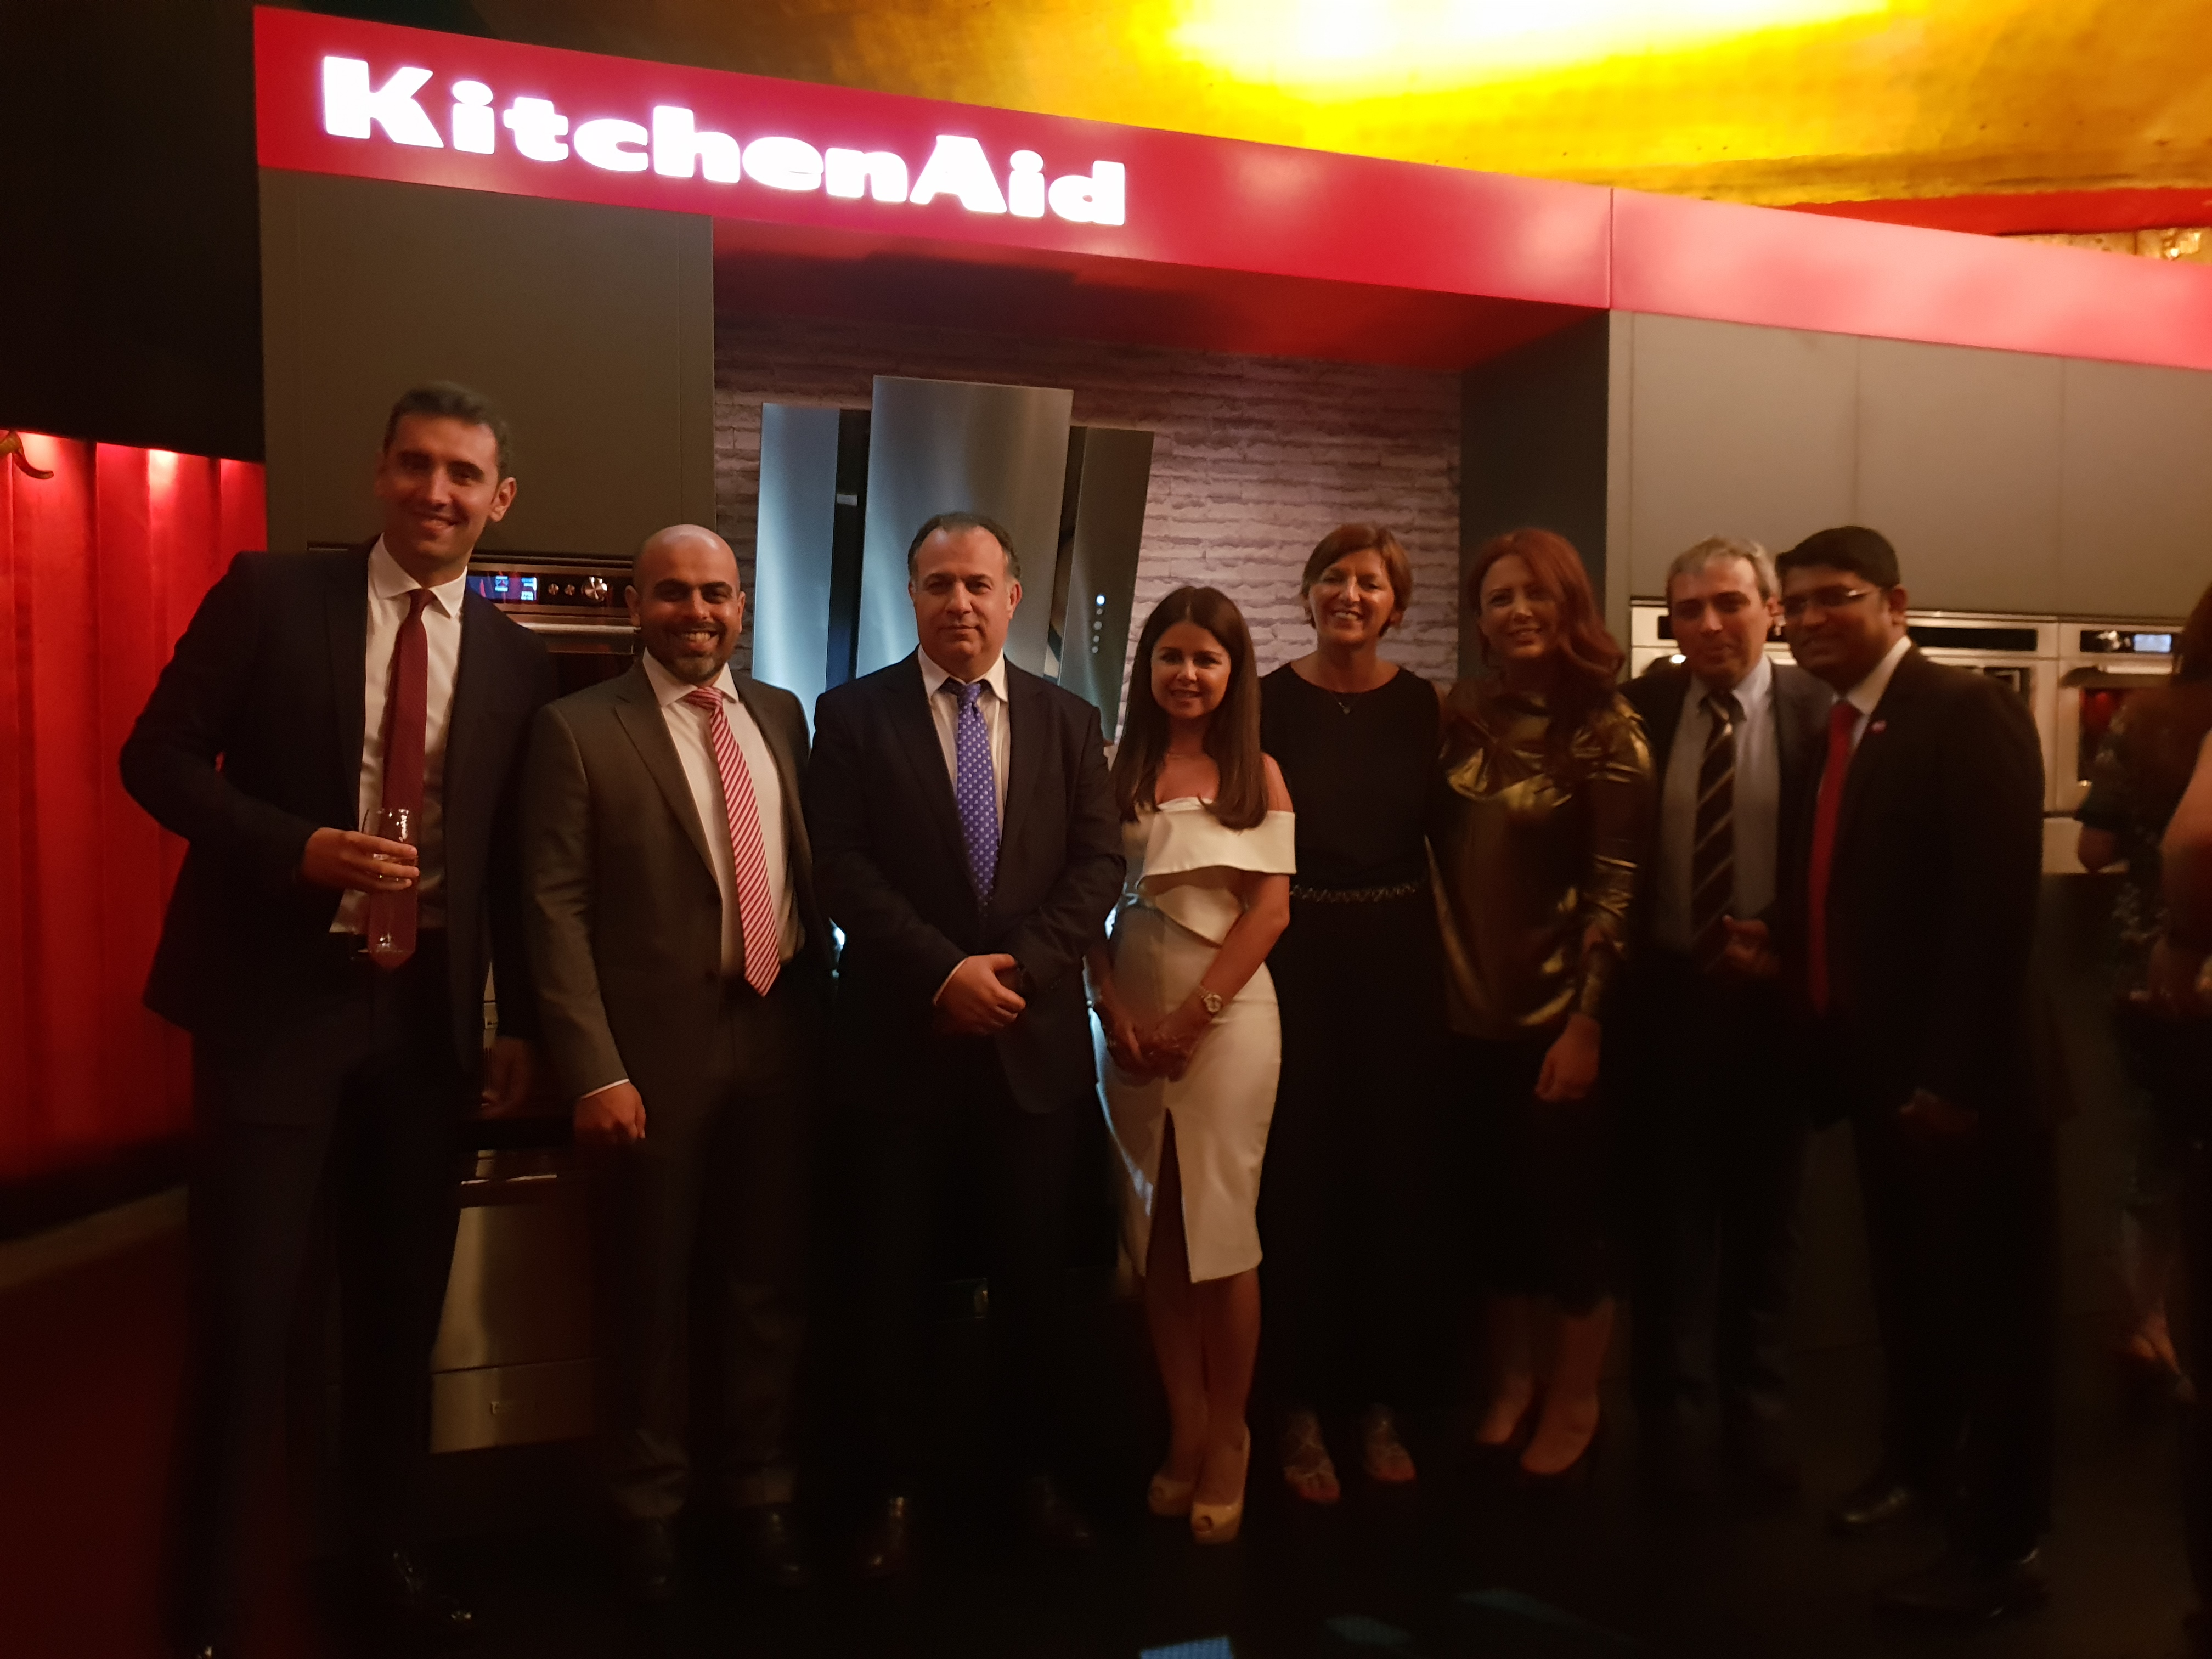 Whirlpool Corporation launches its Iconic Brand KitchenAid Major Appliances in partnership with ACES in Lebanon